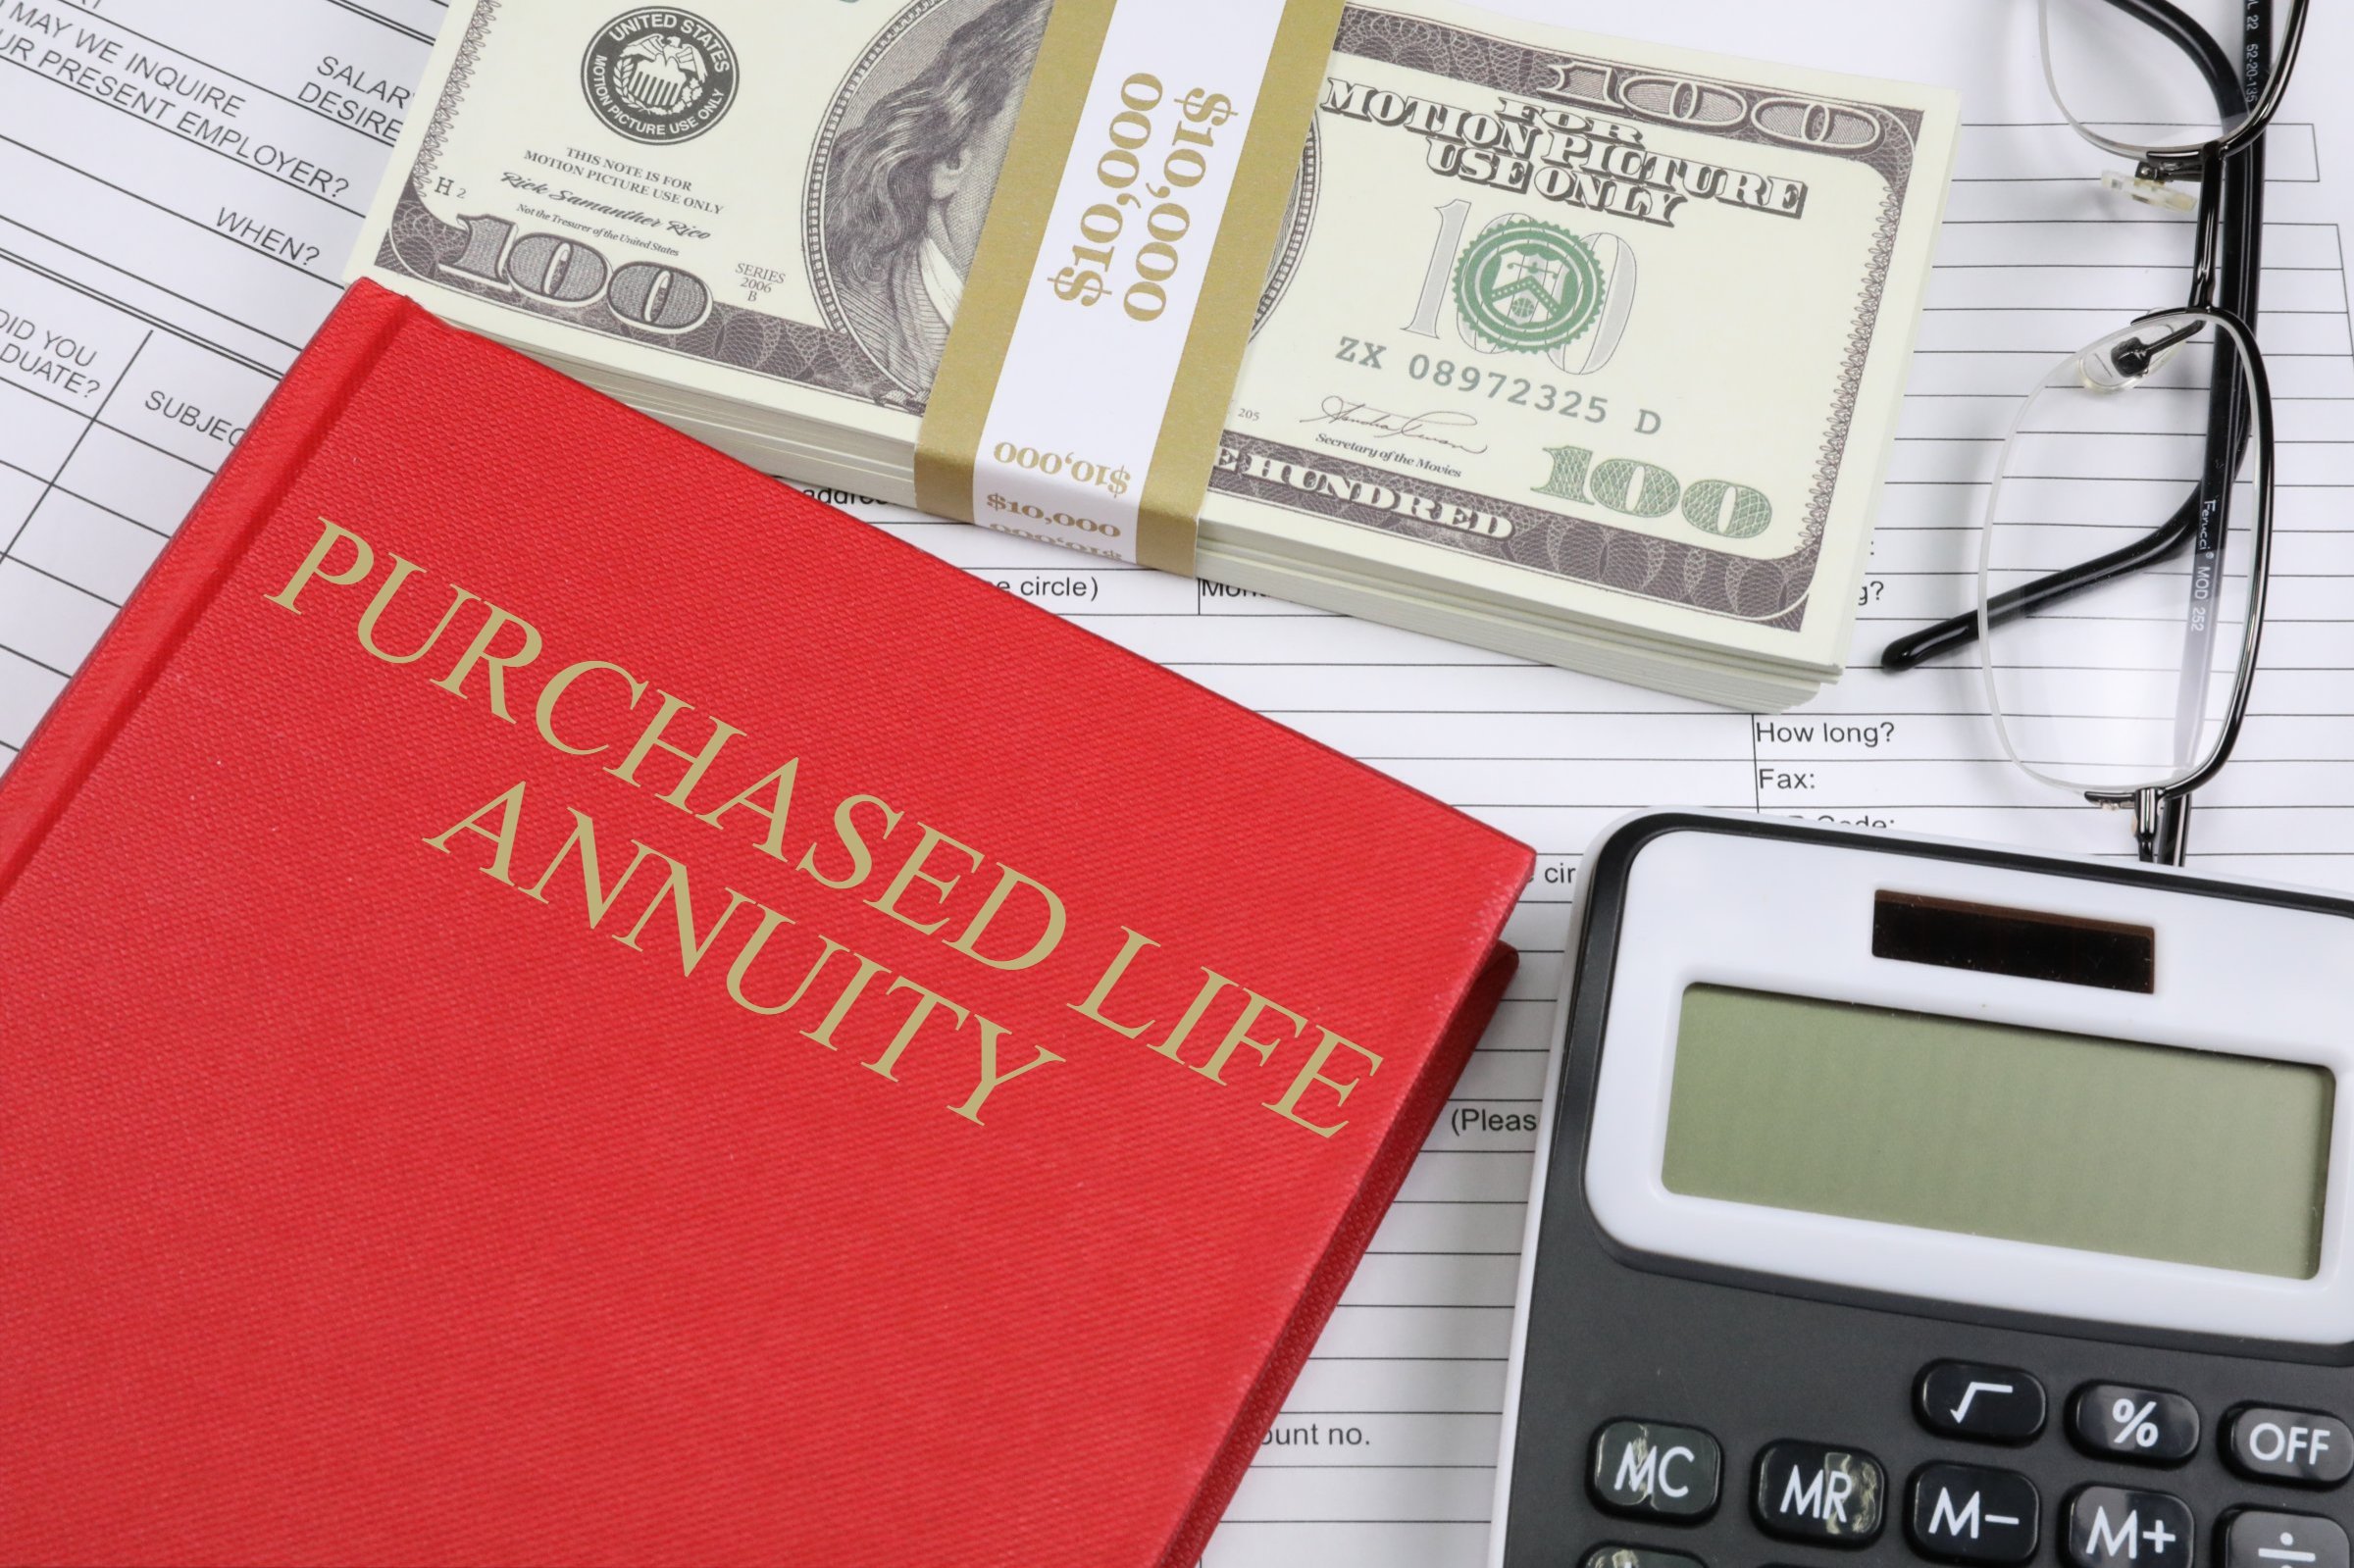 purchased life annuity